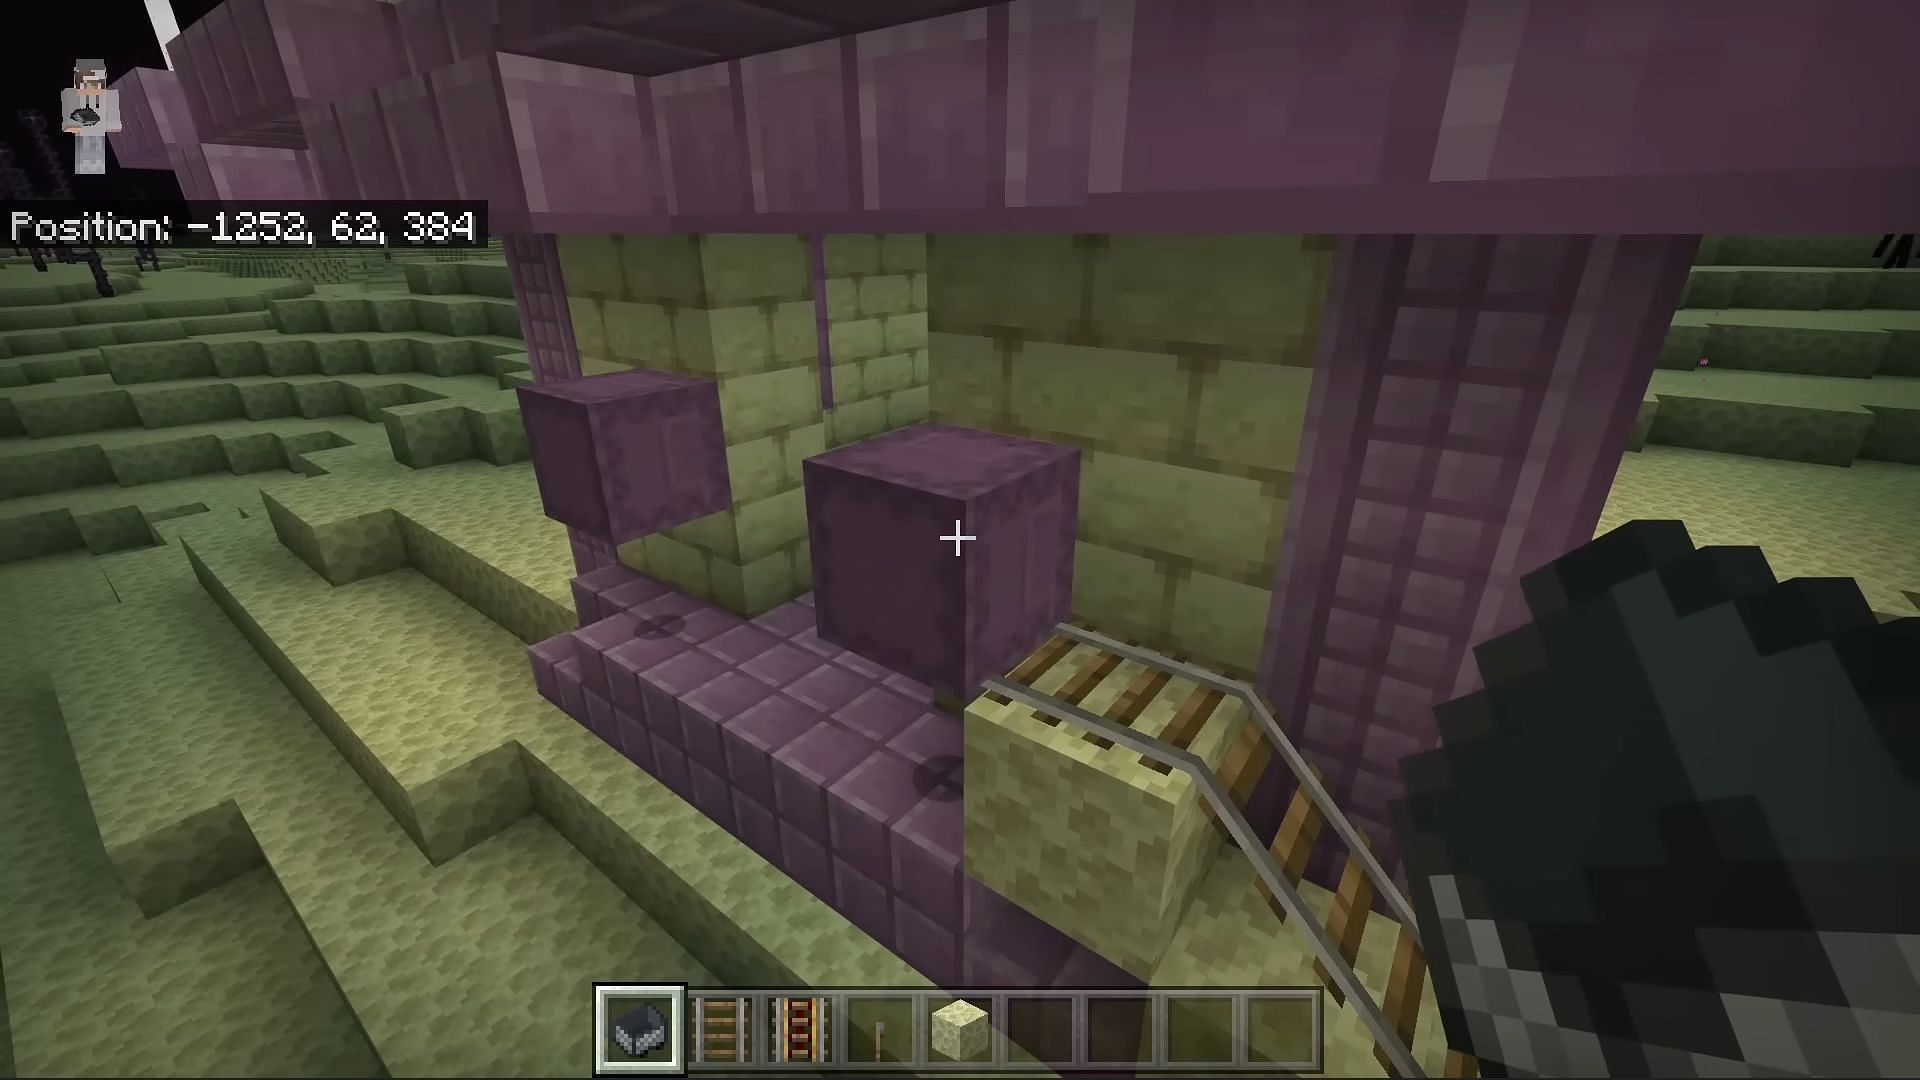 Transporting shulkers on the farm is the hardest part (Image via YouTube/JC Playz)